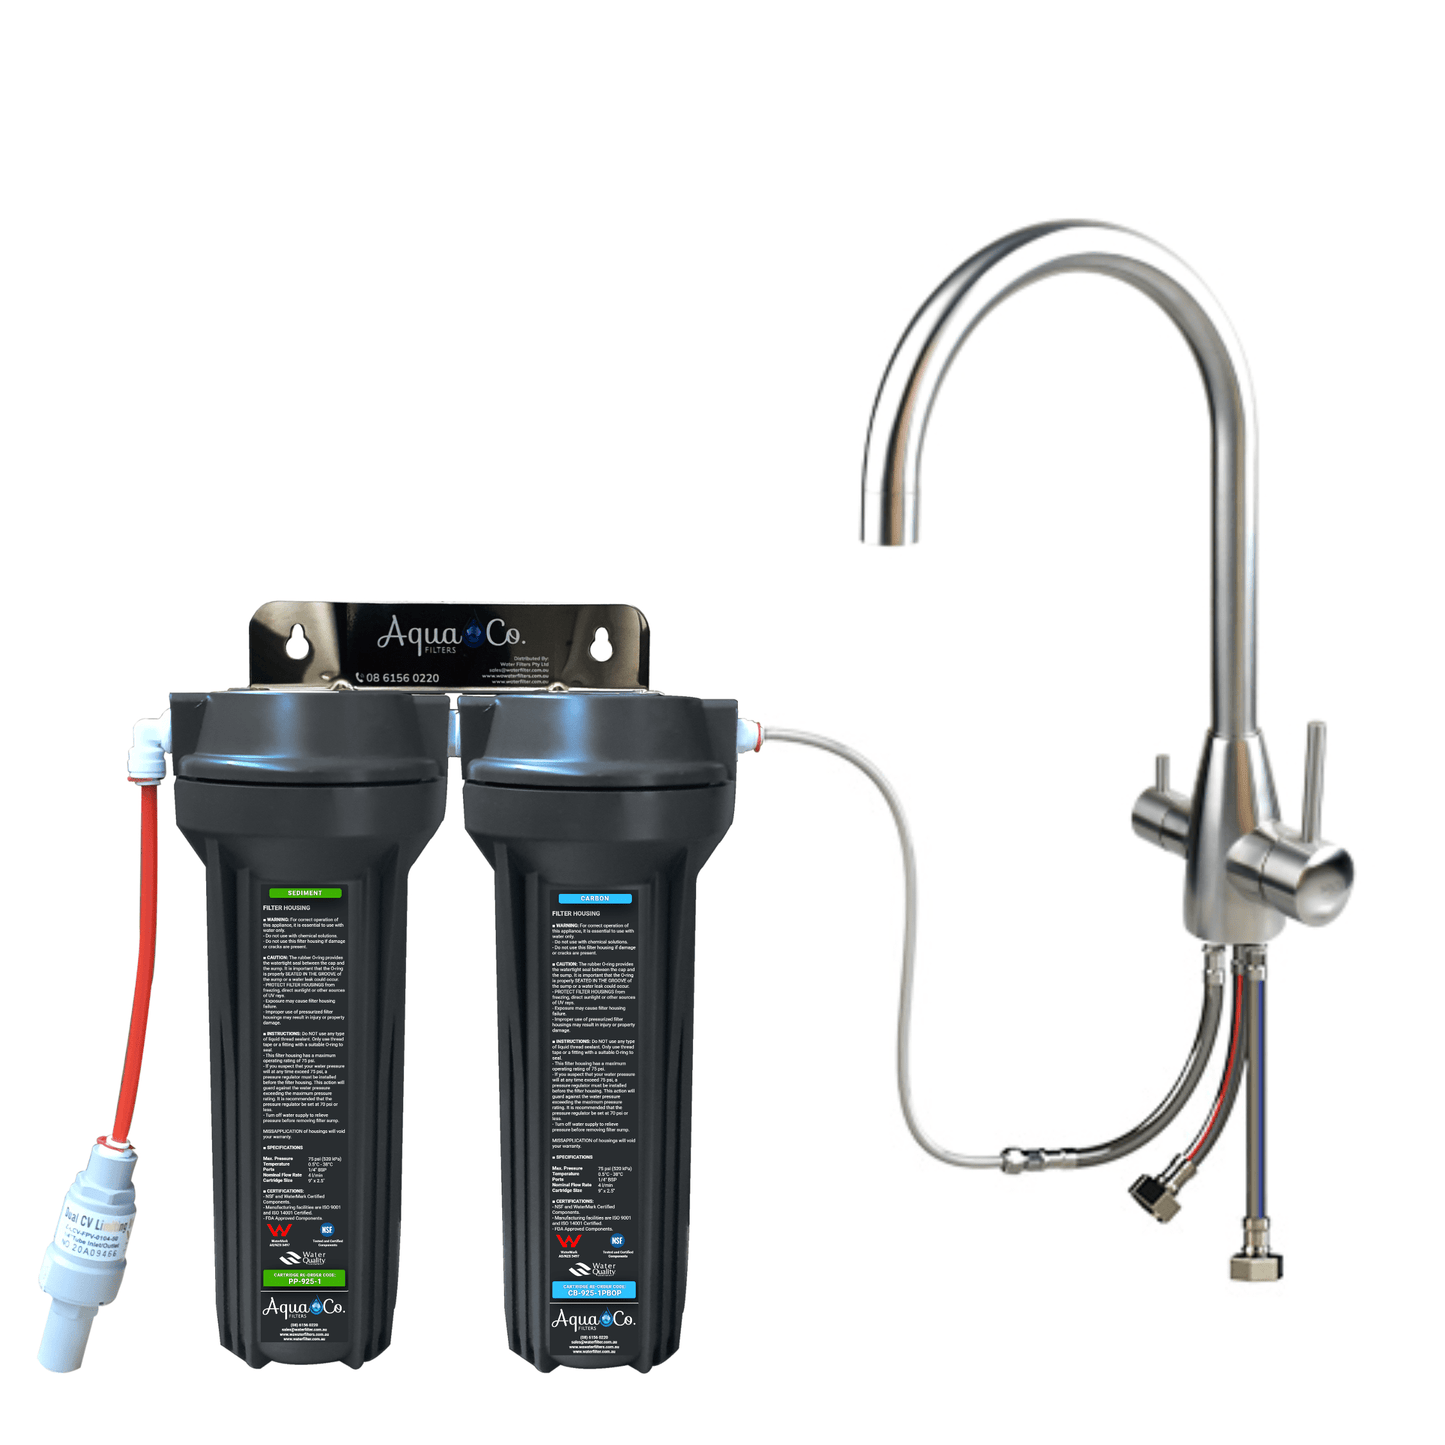 3 Way Mixer Tap with AquaCo SYS-925SC Undersink Water Filter - Reduces Chlorine, Taste, Odours, Parasites, and Lead.